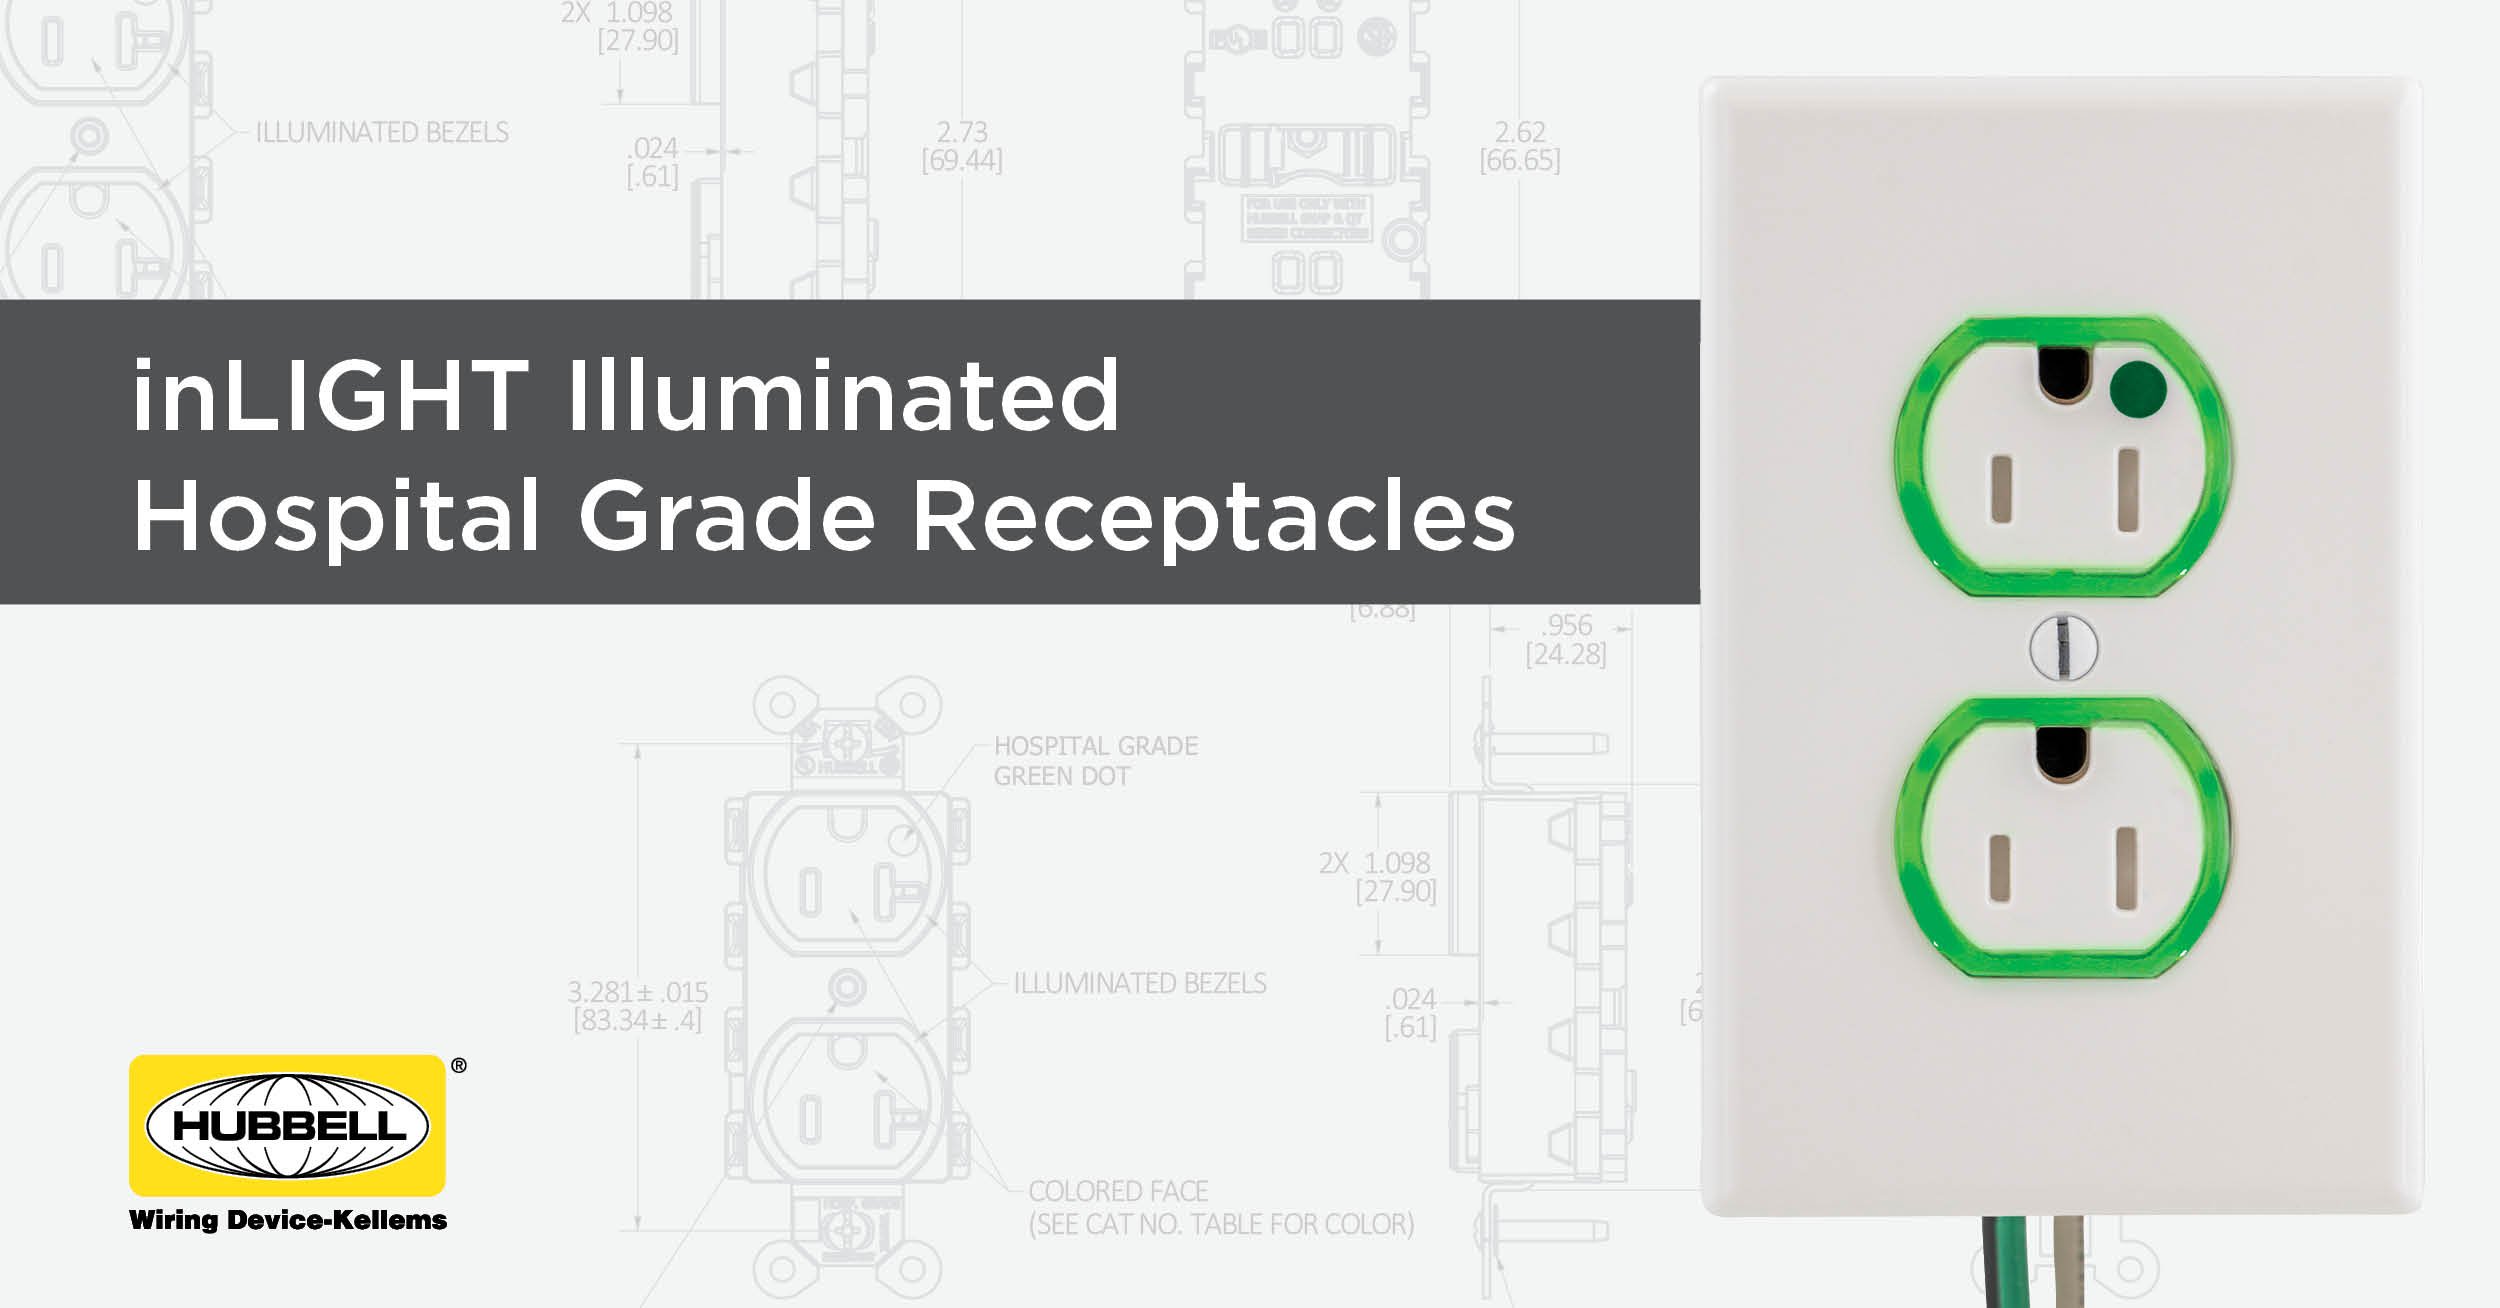 Introducing inLIGHT Illuminated Hospital Grade Receptacles:‬‬ Now THAT’s a Healthy Glow